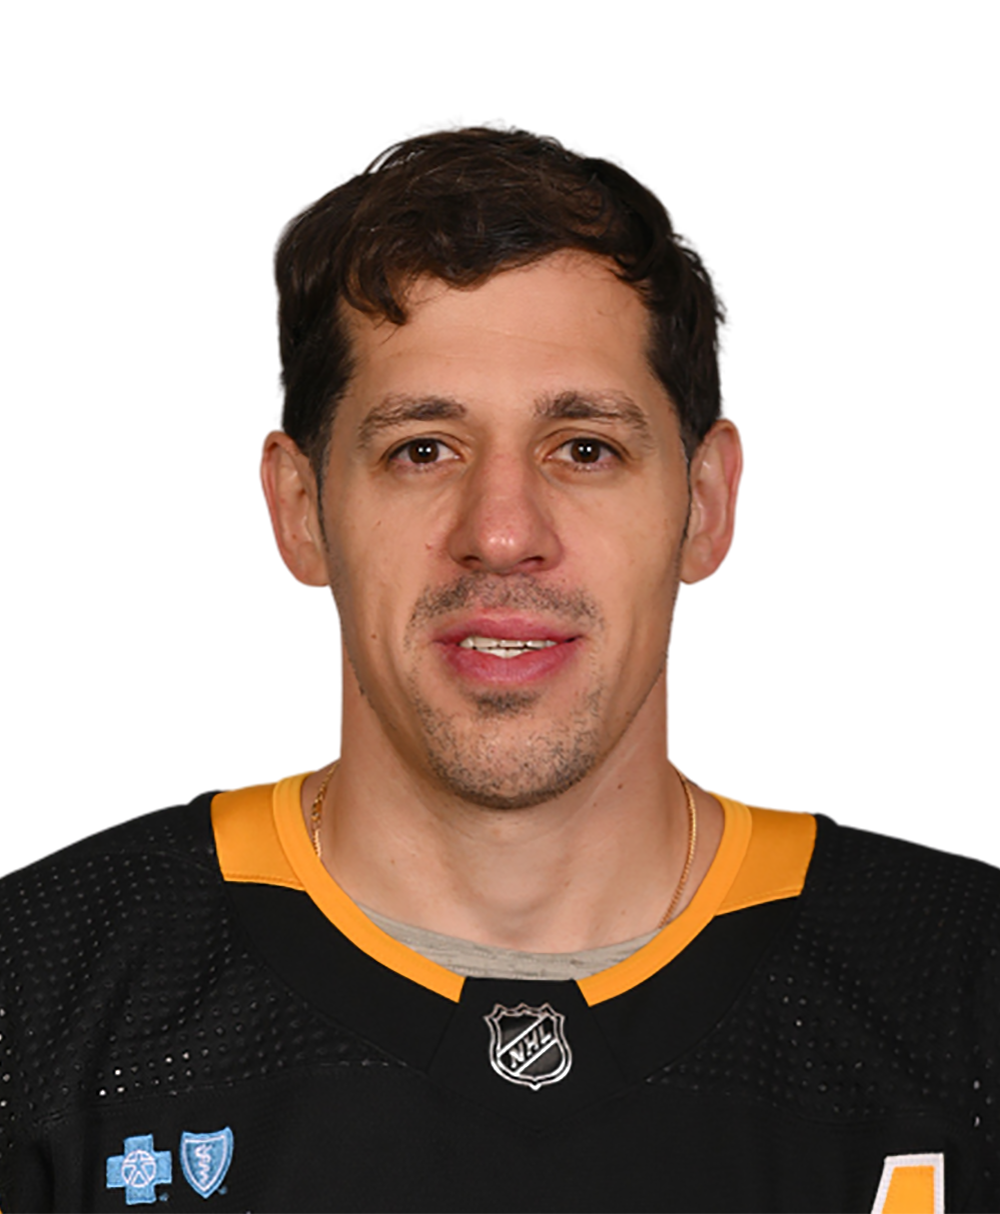 Evgeni Malkin Rips Team, Power Play after Game 1 Loss